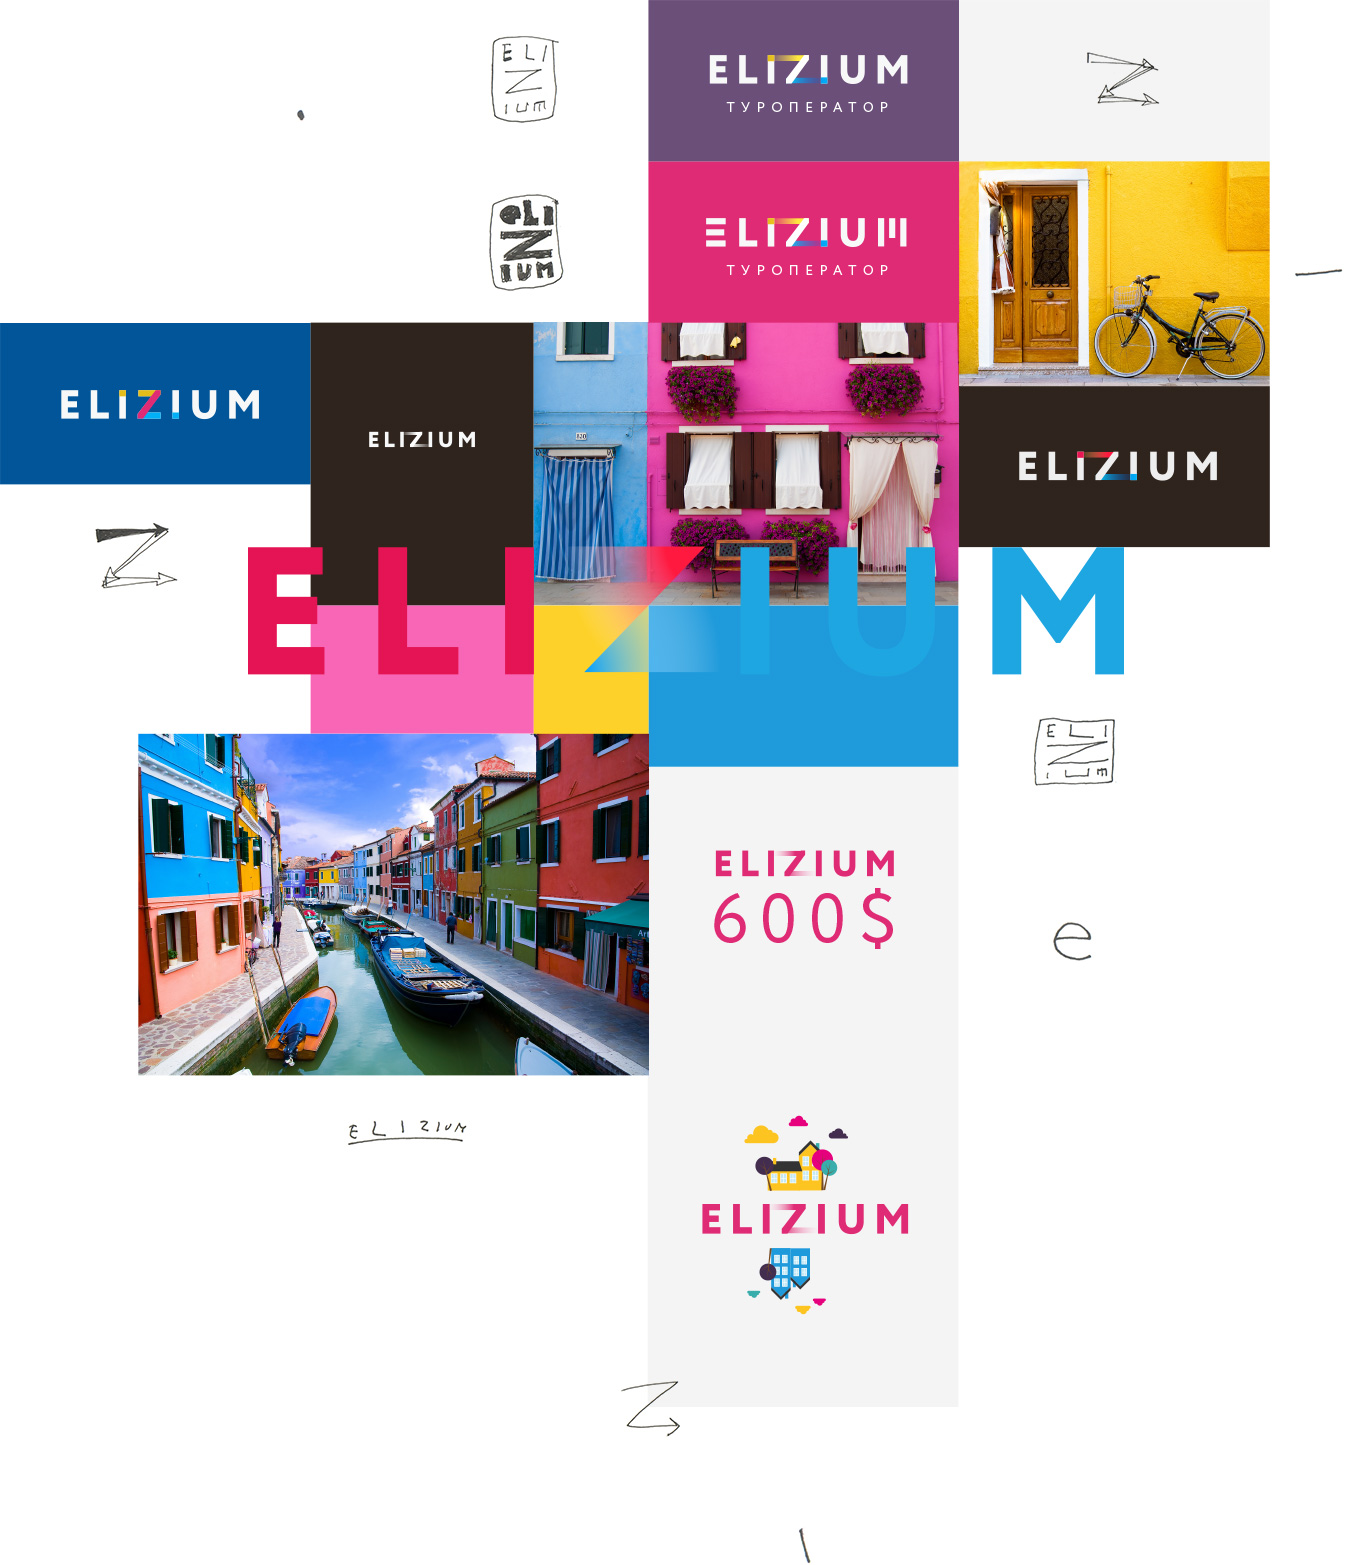 elizium composition, combining all the concepts in one without any interactive elements, sadly